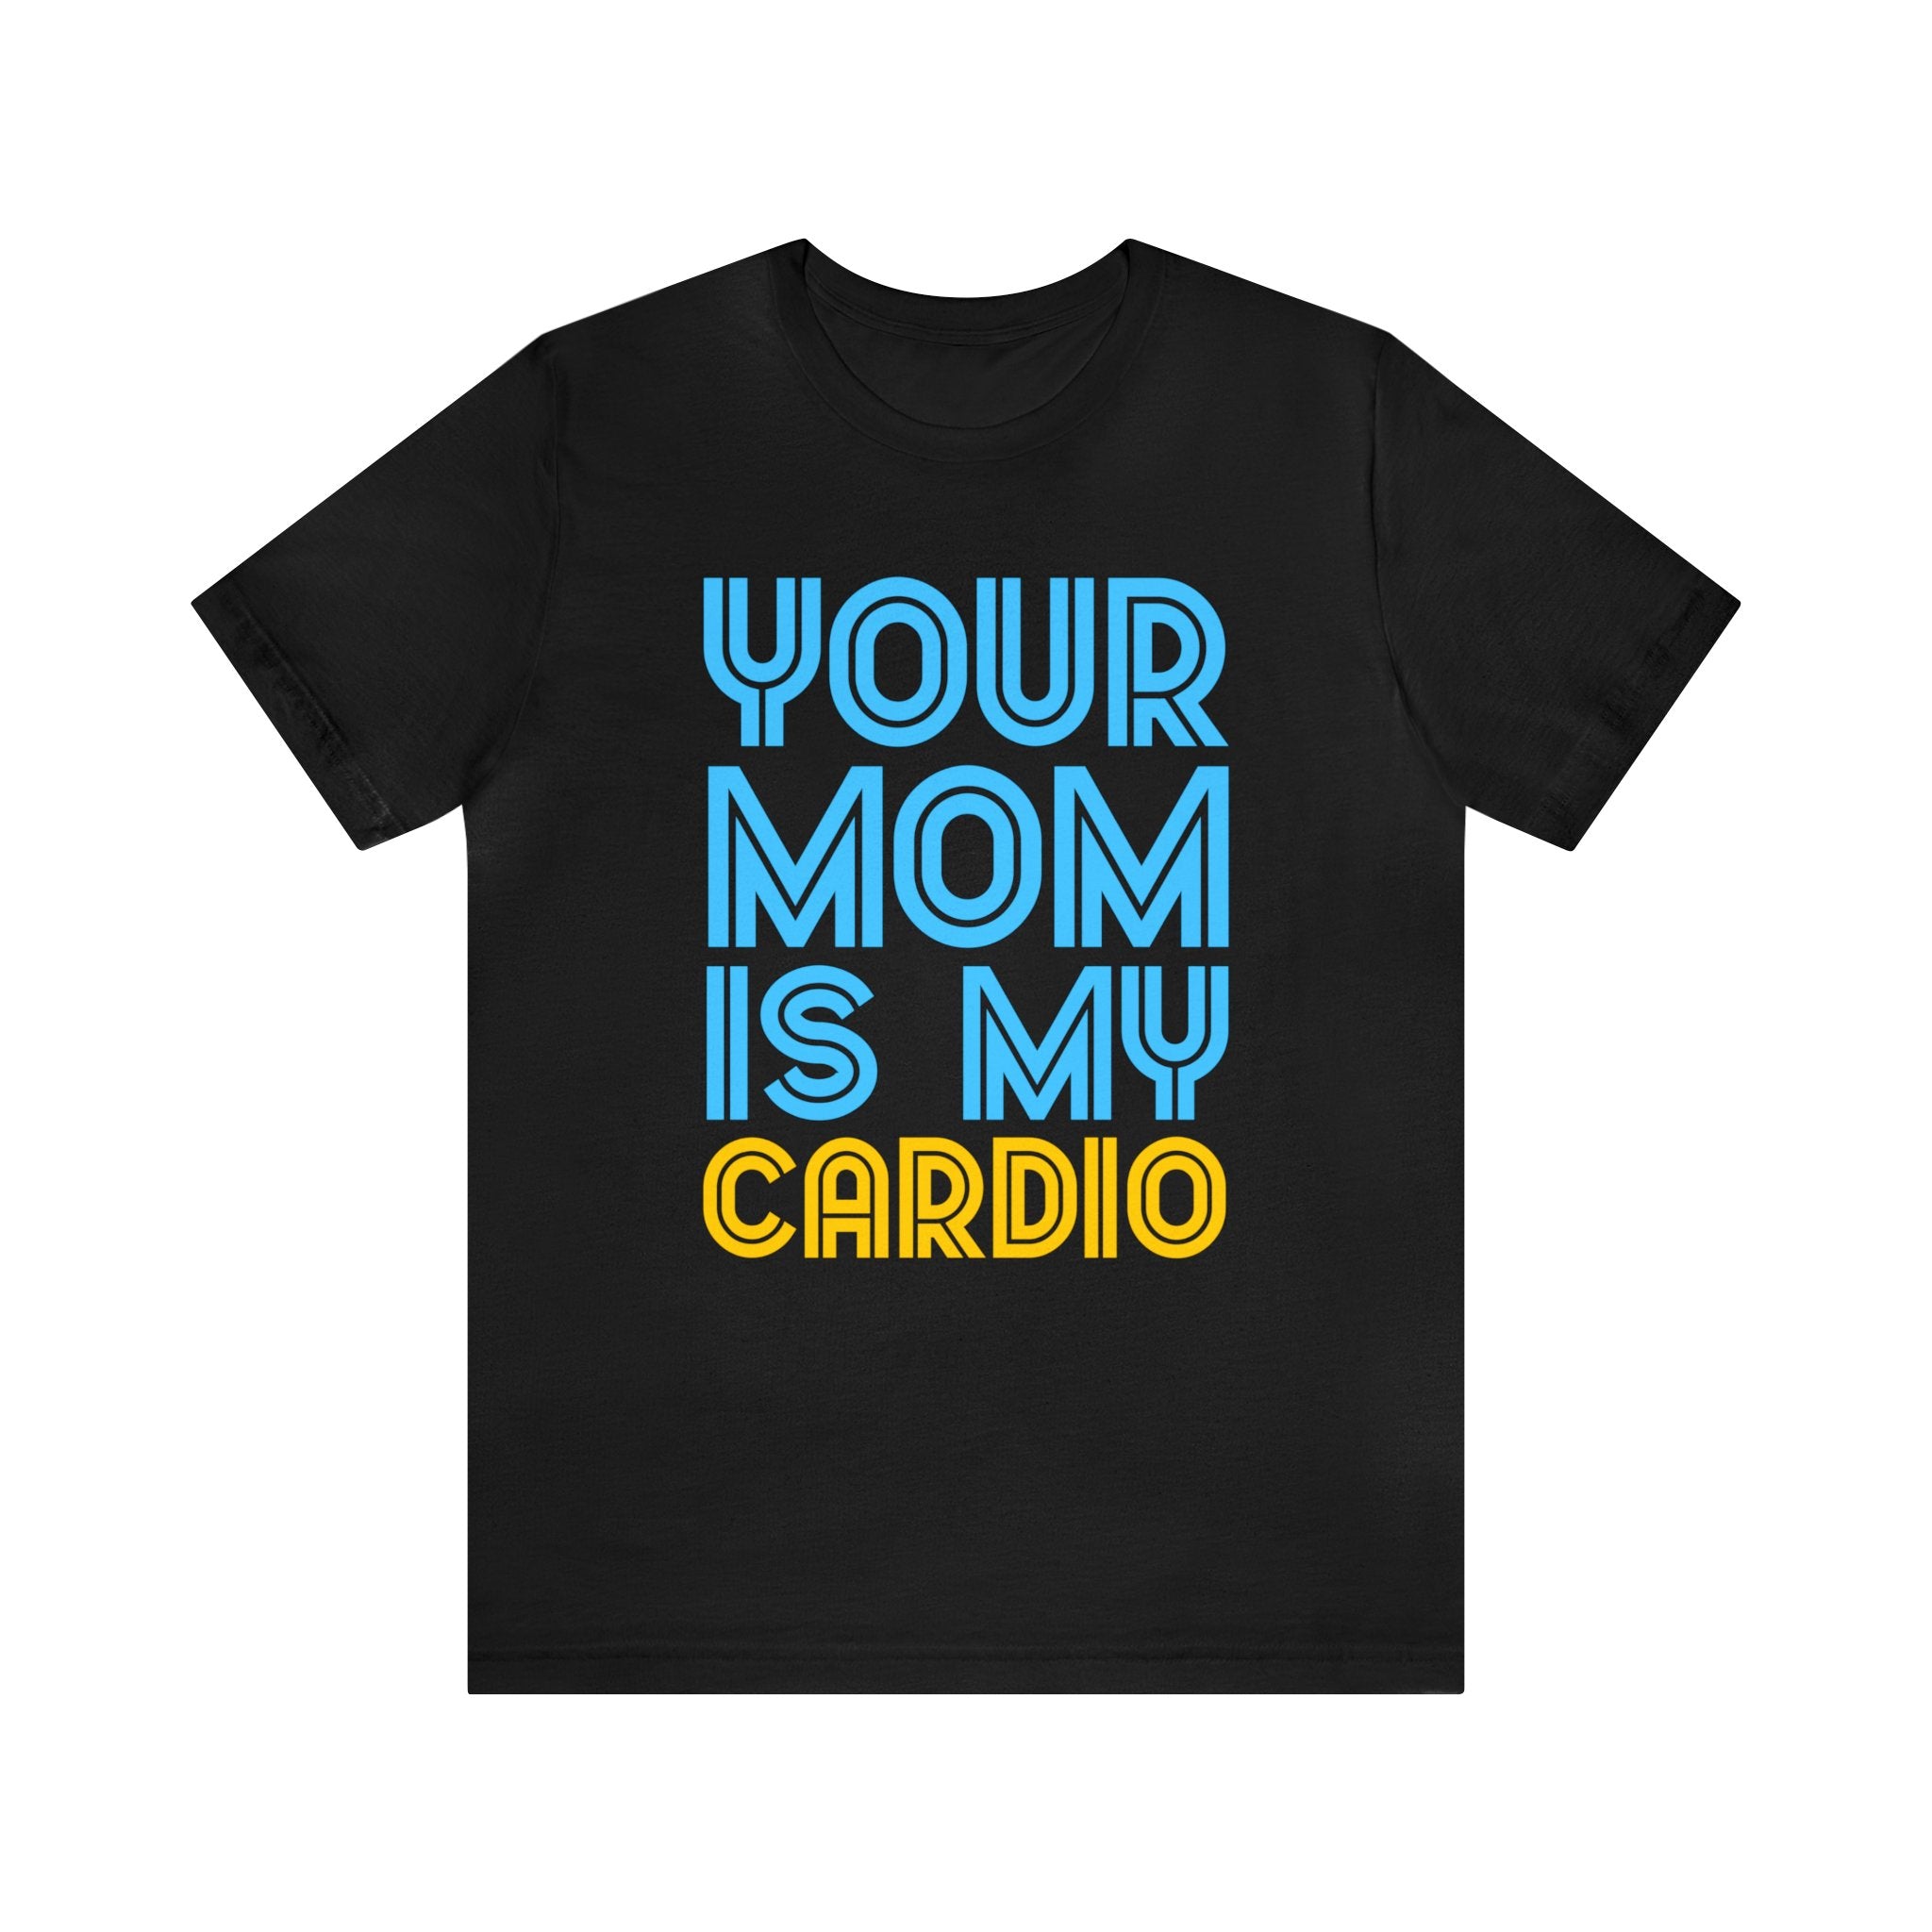 Order your "Your Mother Is My Cardio T-Shirt" now and start waiting for it to arrive.